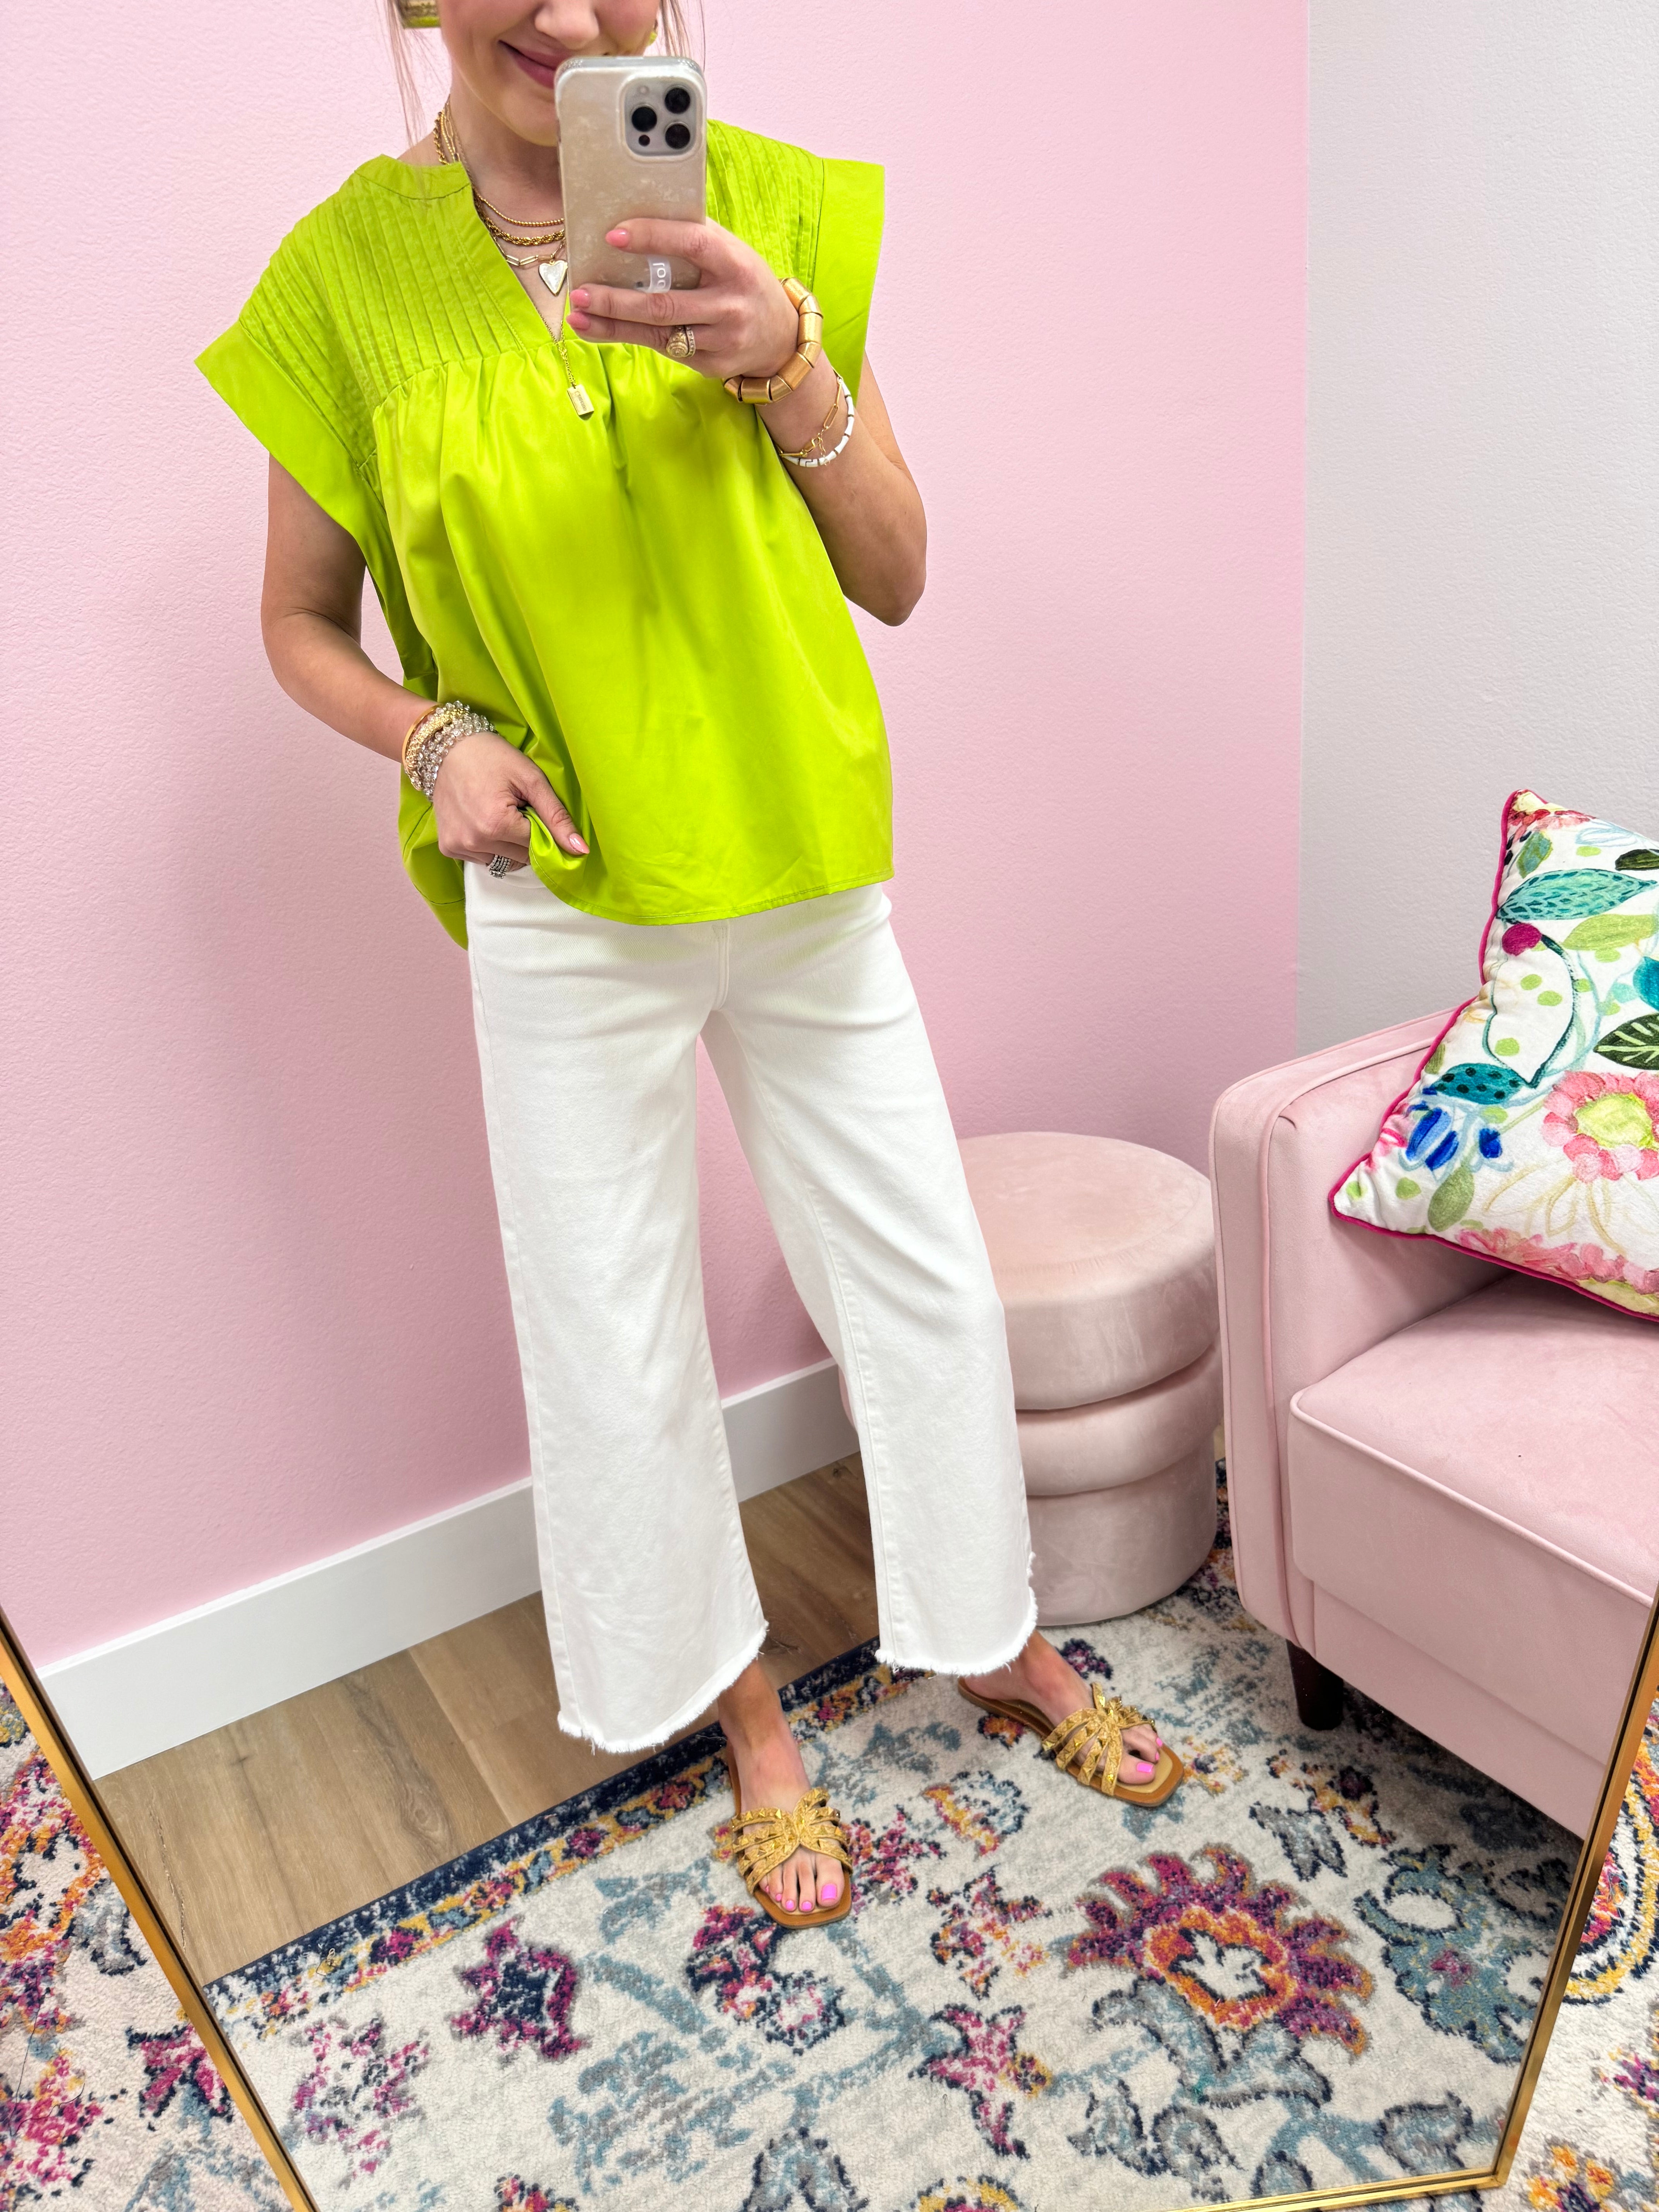 Lime Pleated Short Sleeve Top